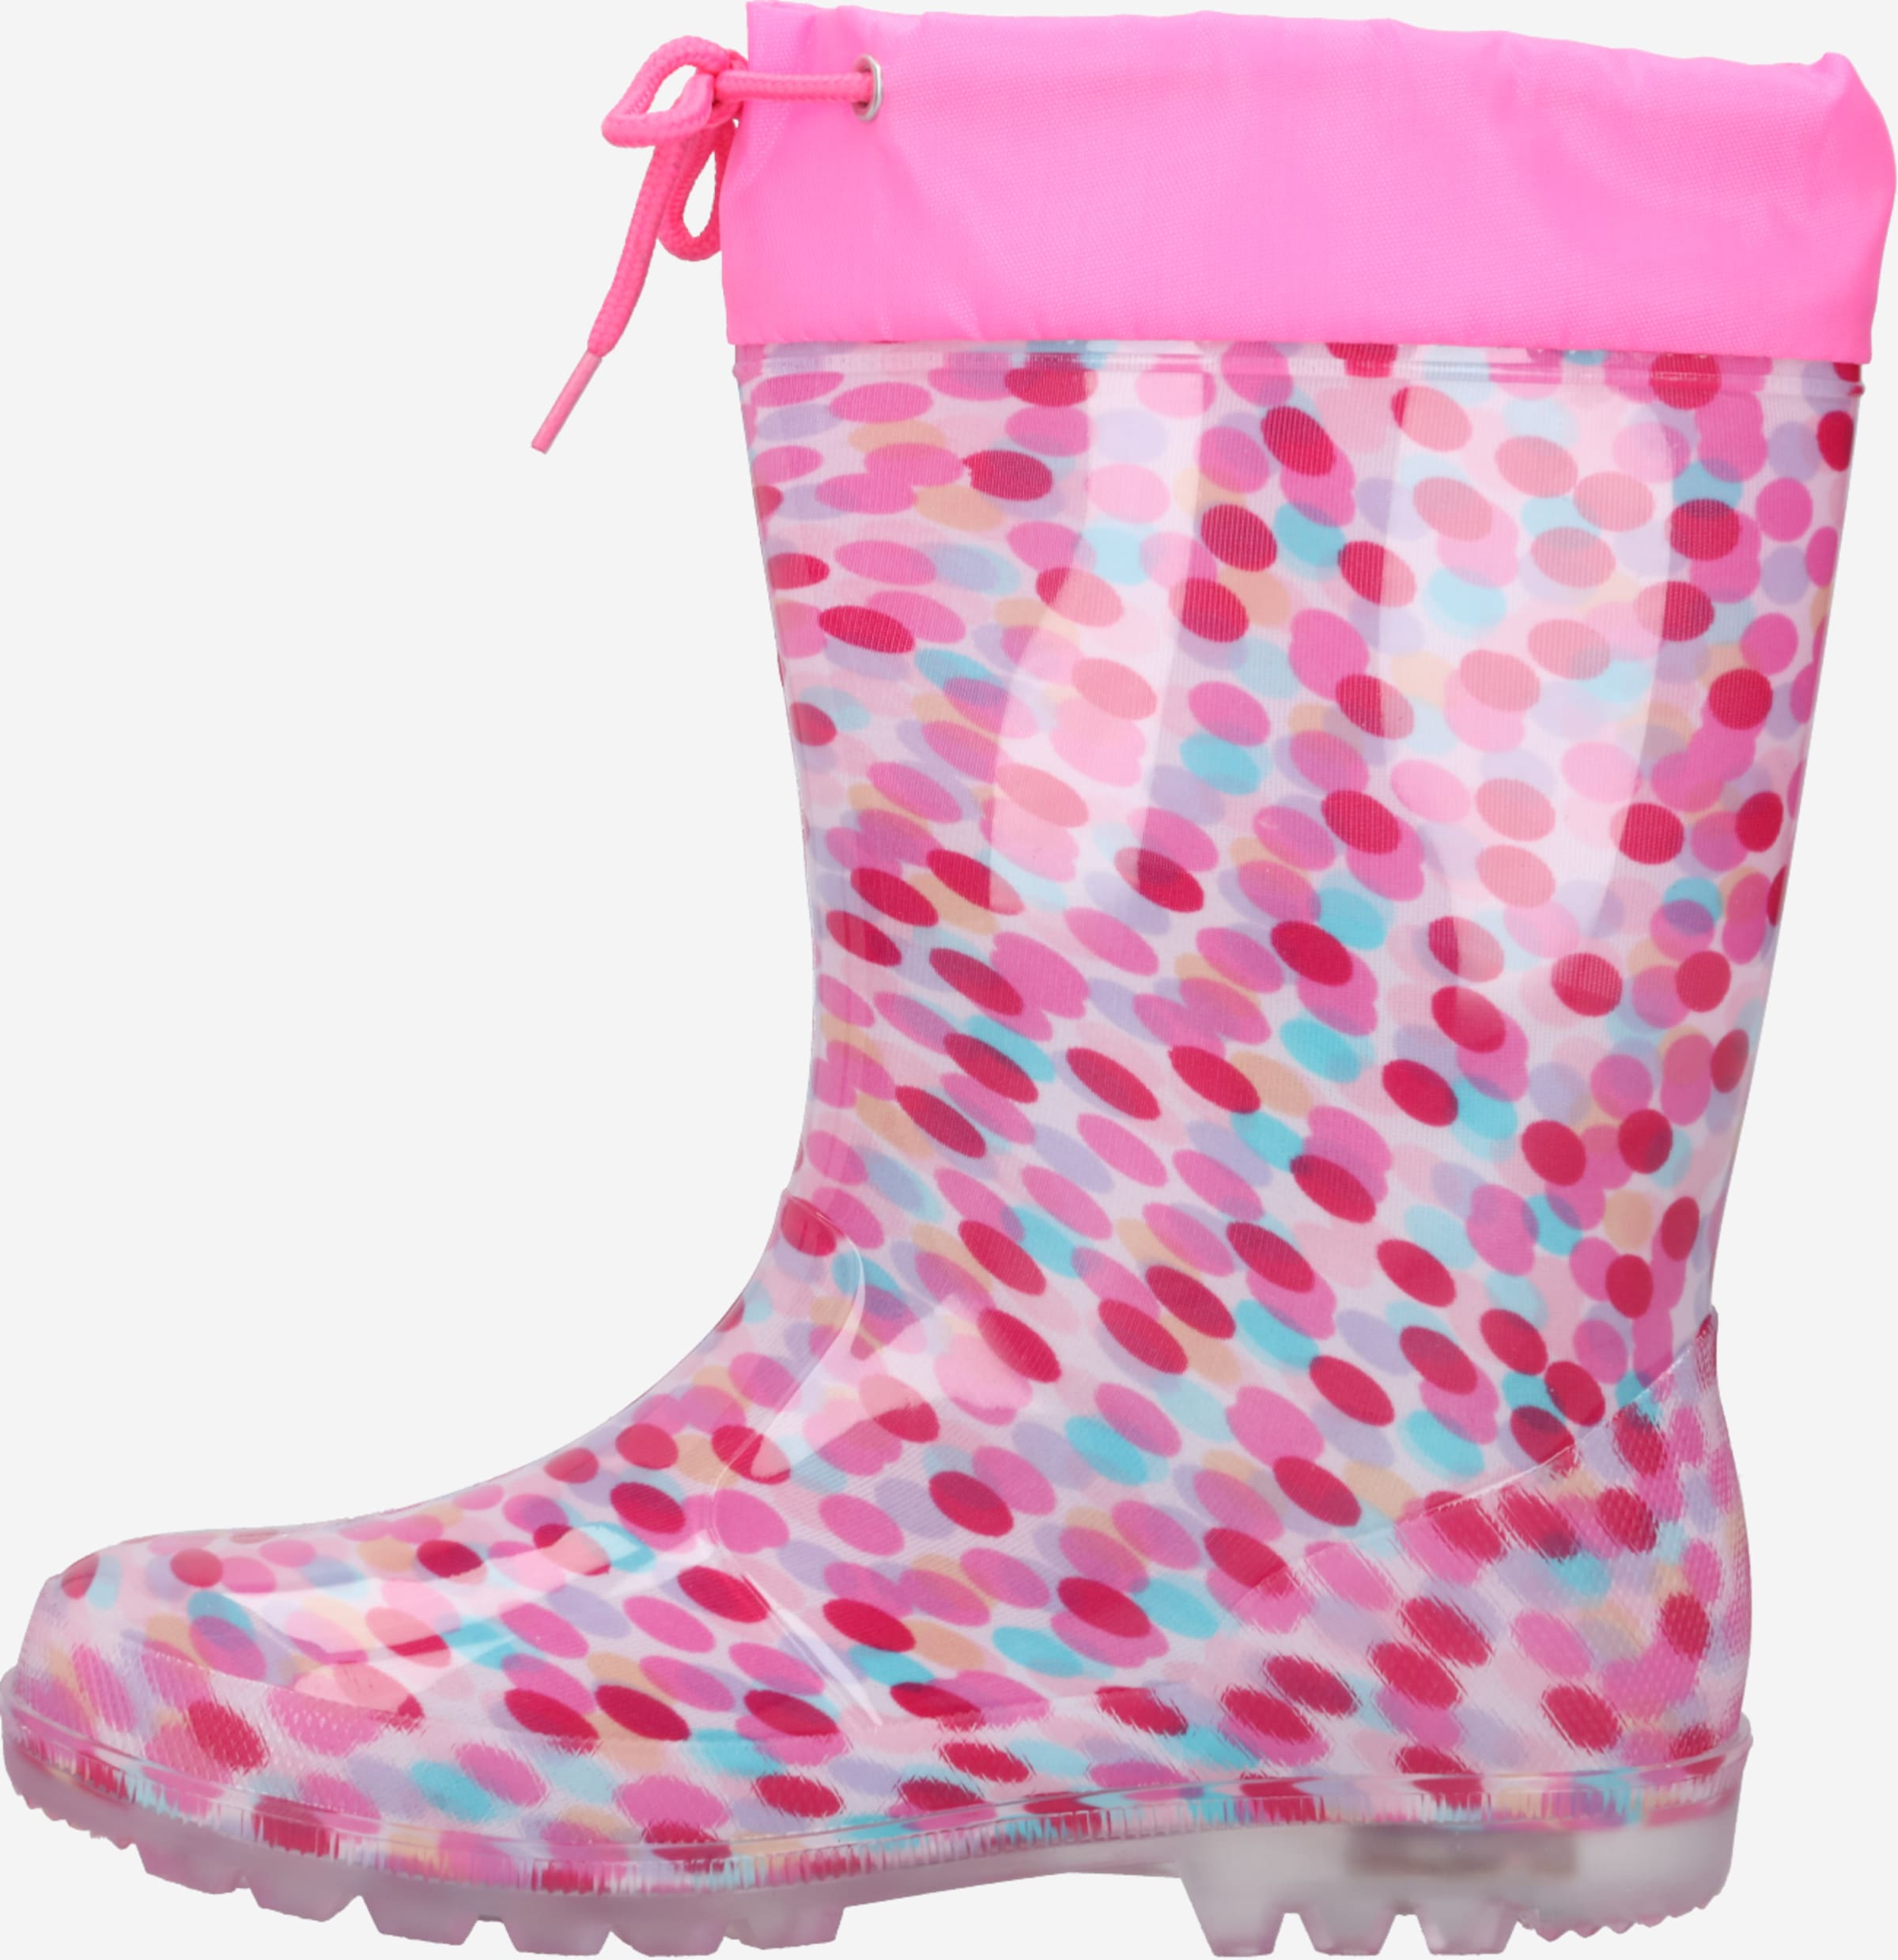 LICO Gummistiefel 'Power Blinky' in Pink, Rosa | ABOUT YOU